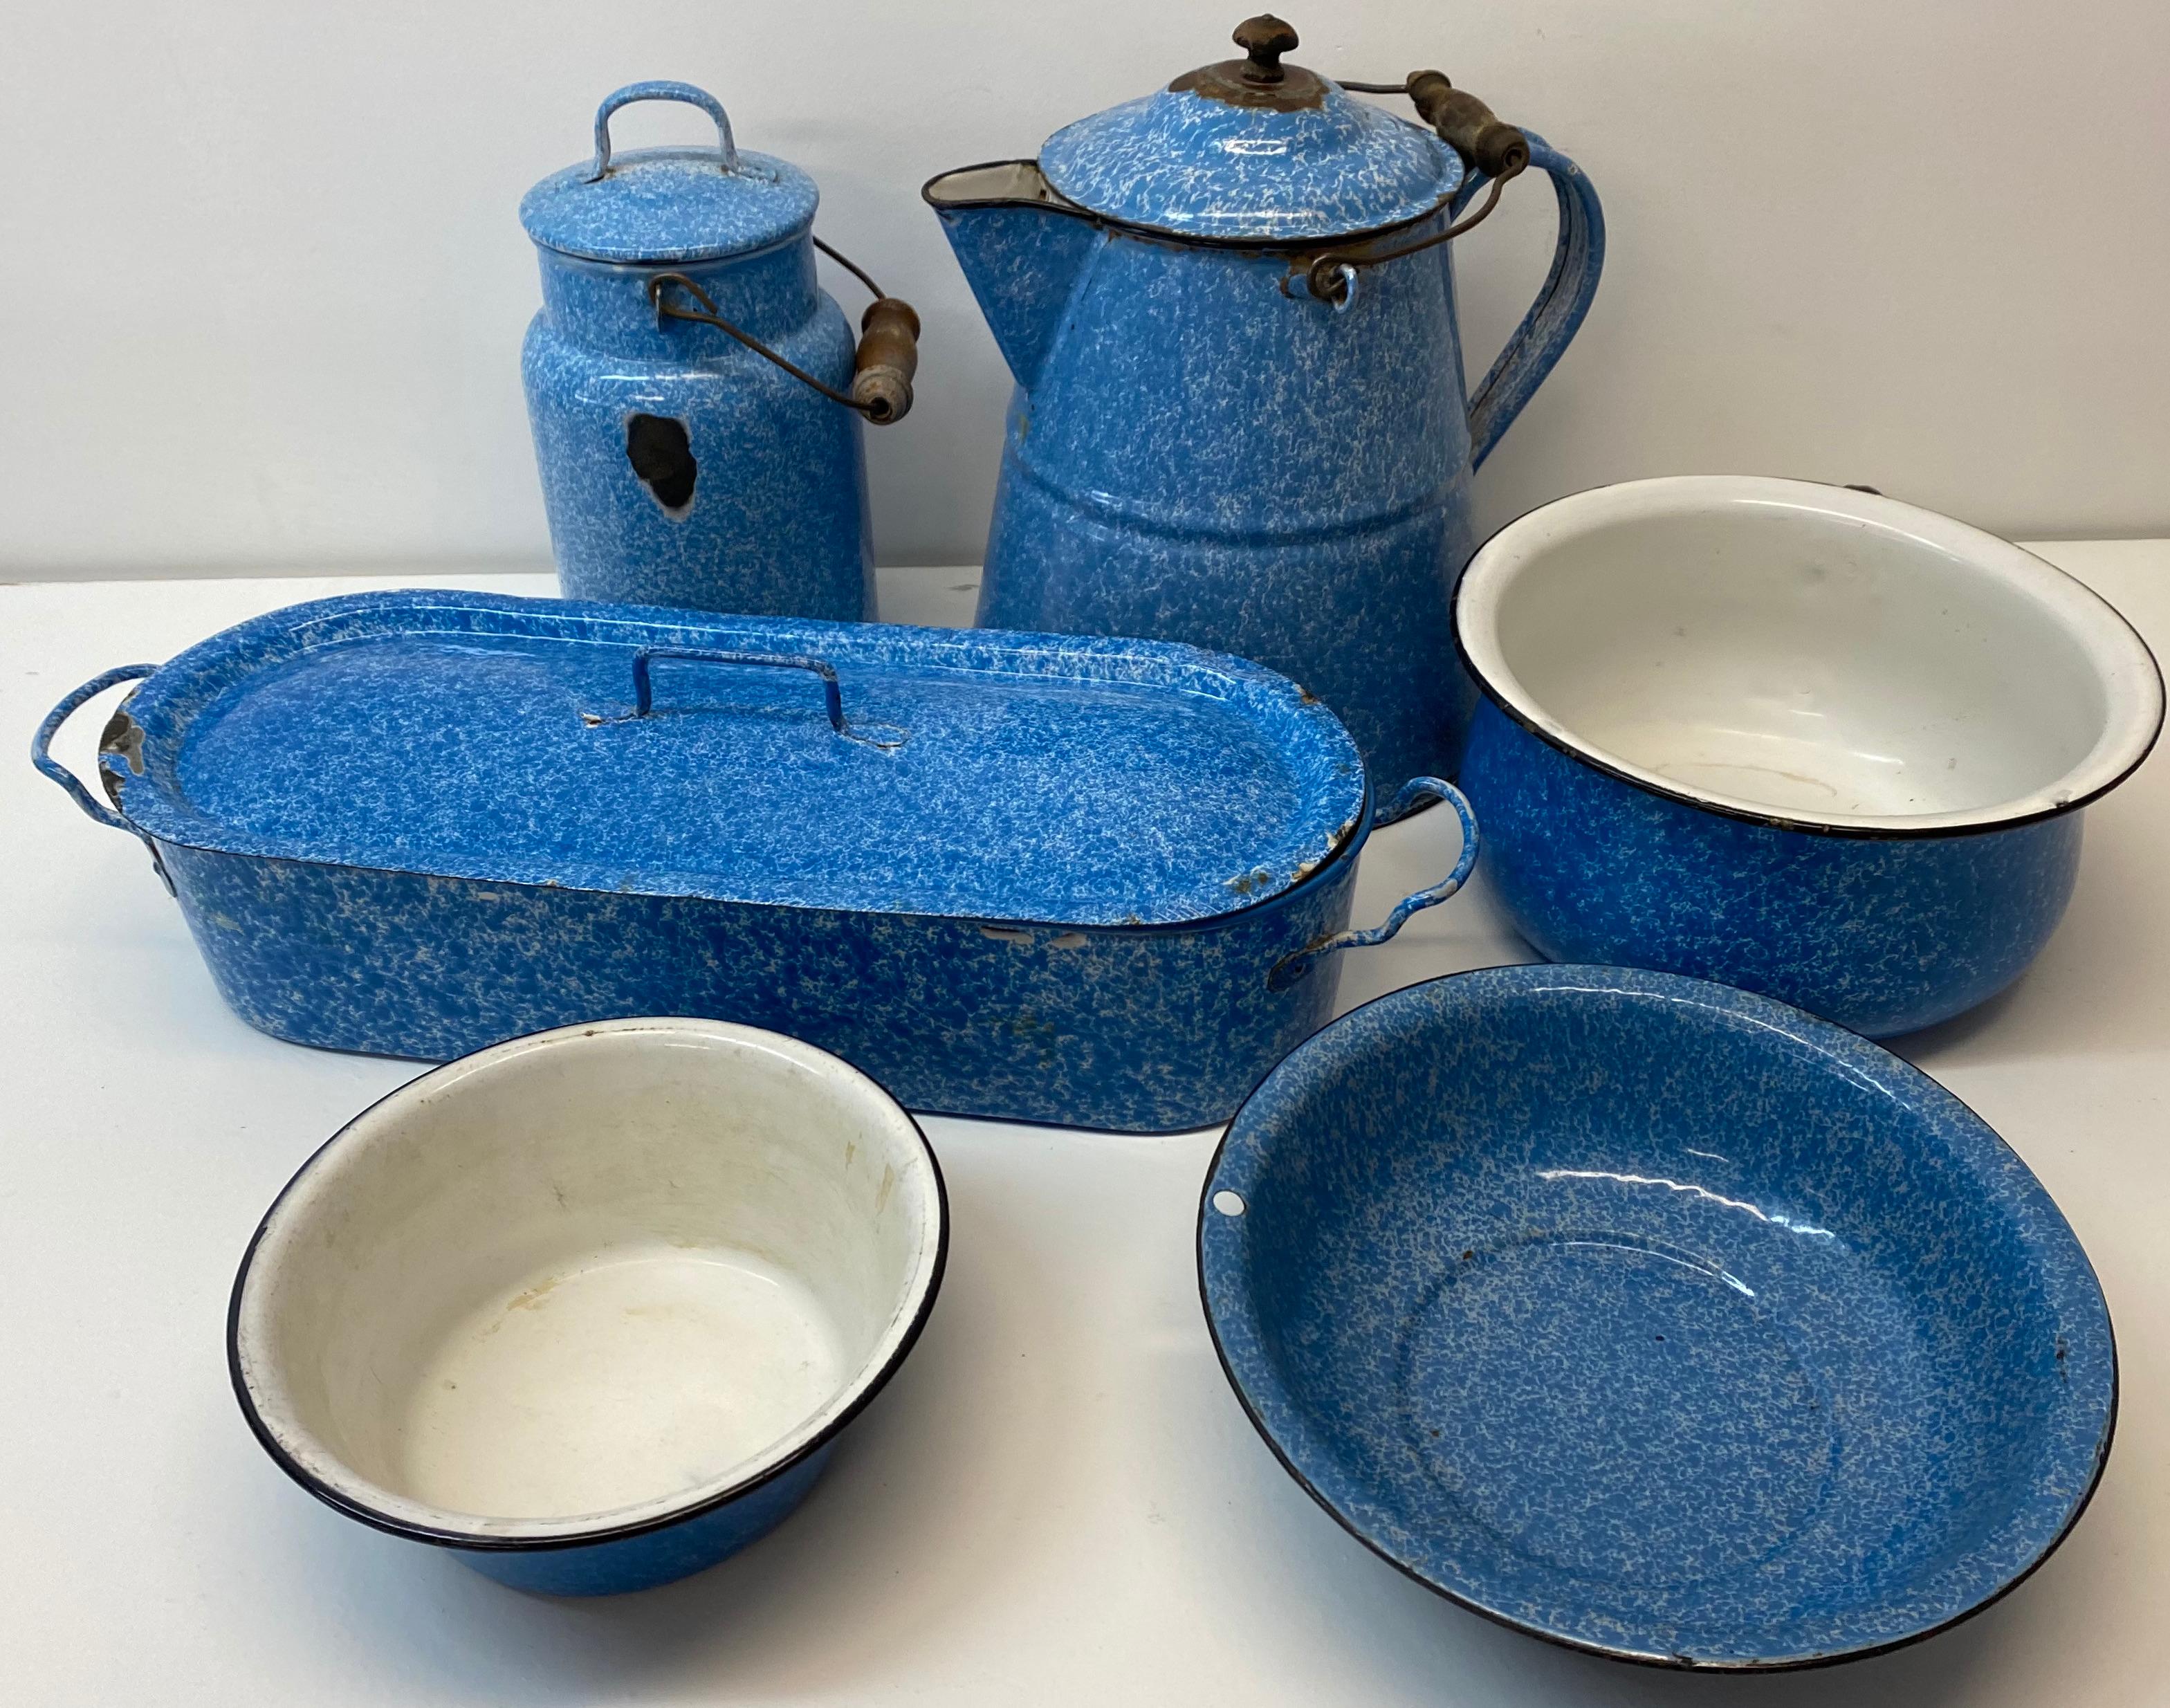 Early 20th century blue and white graniteware six pieces

A fine old collection of antique American metal and enamel graniteware

A coffee pot, coffee can with lid, a long narrow steamer dish with insert two bowls and a basin

Various